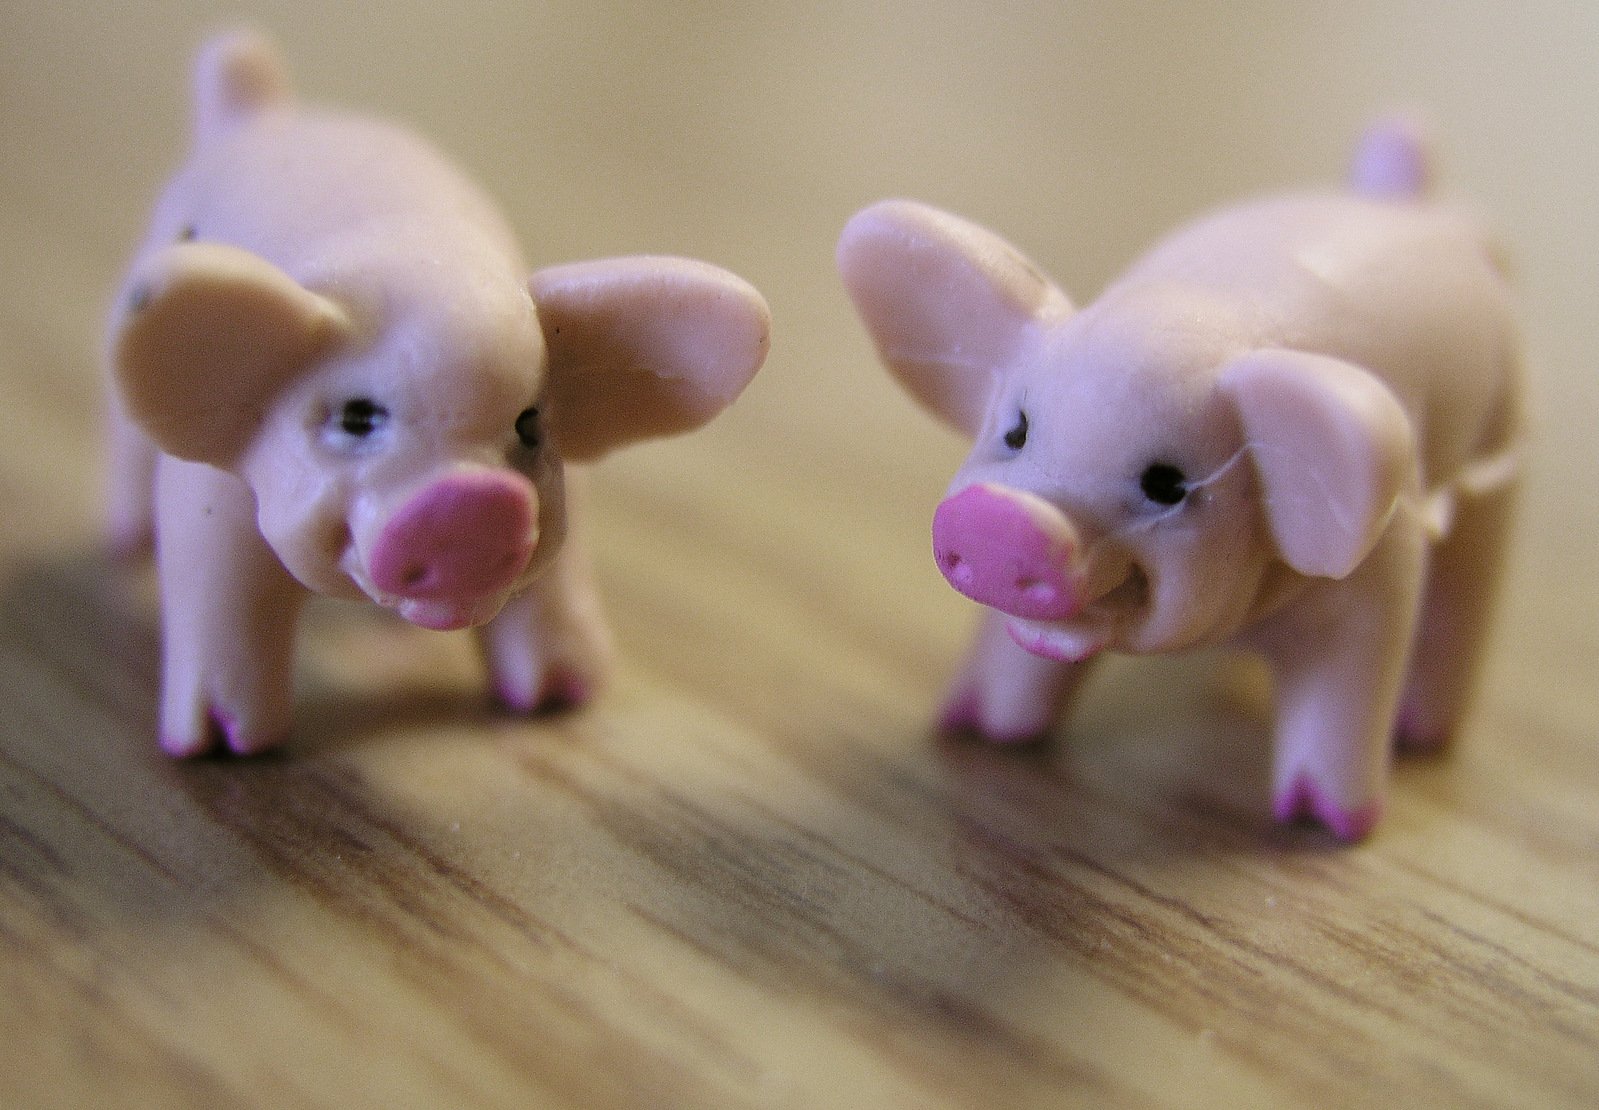 two toy pigs stand on the ground in close up